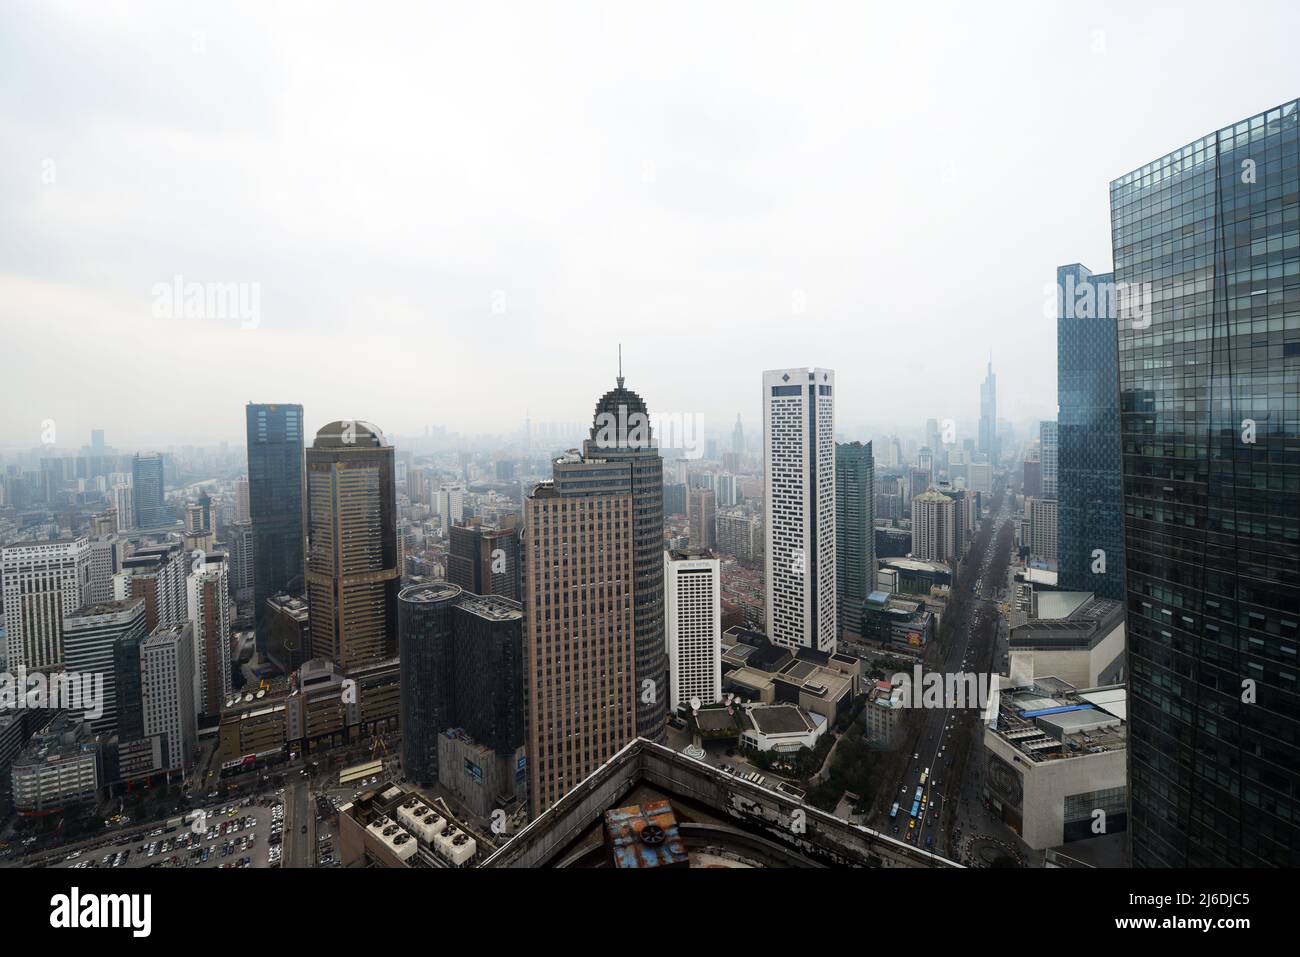 Modern architecture dominates the skyline in Nanjing, China. Stock Photo